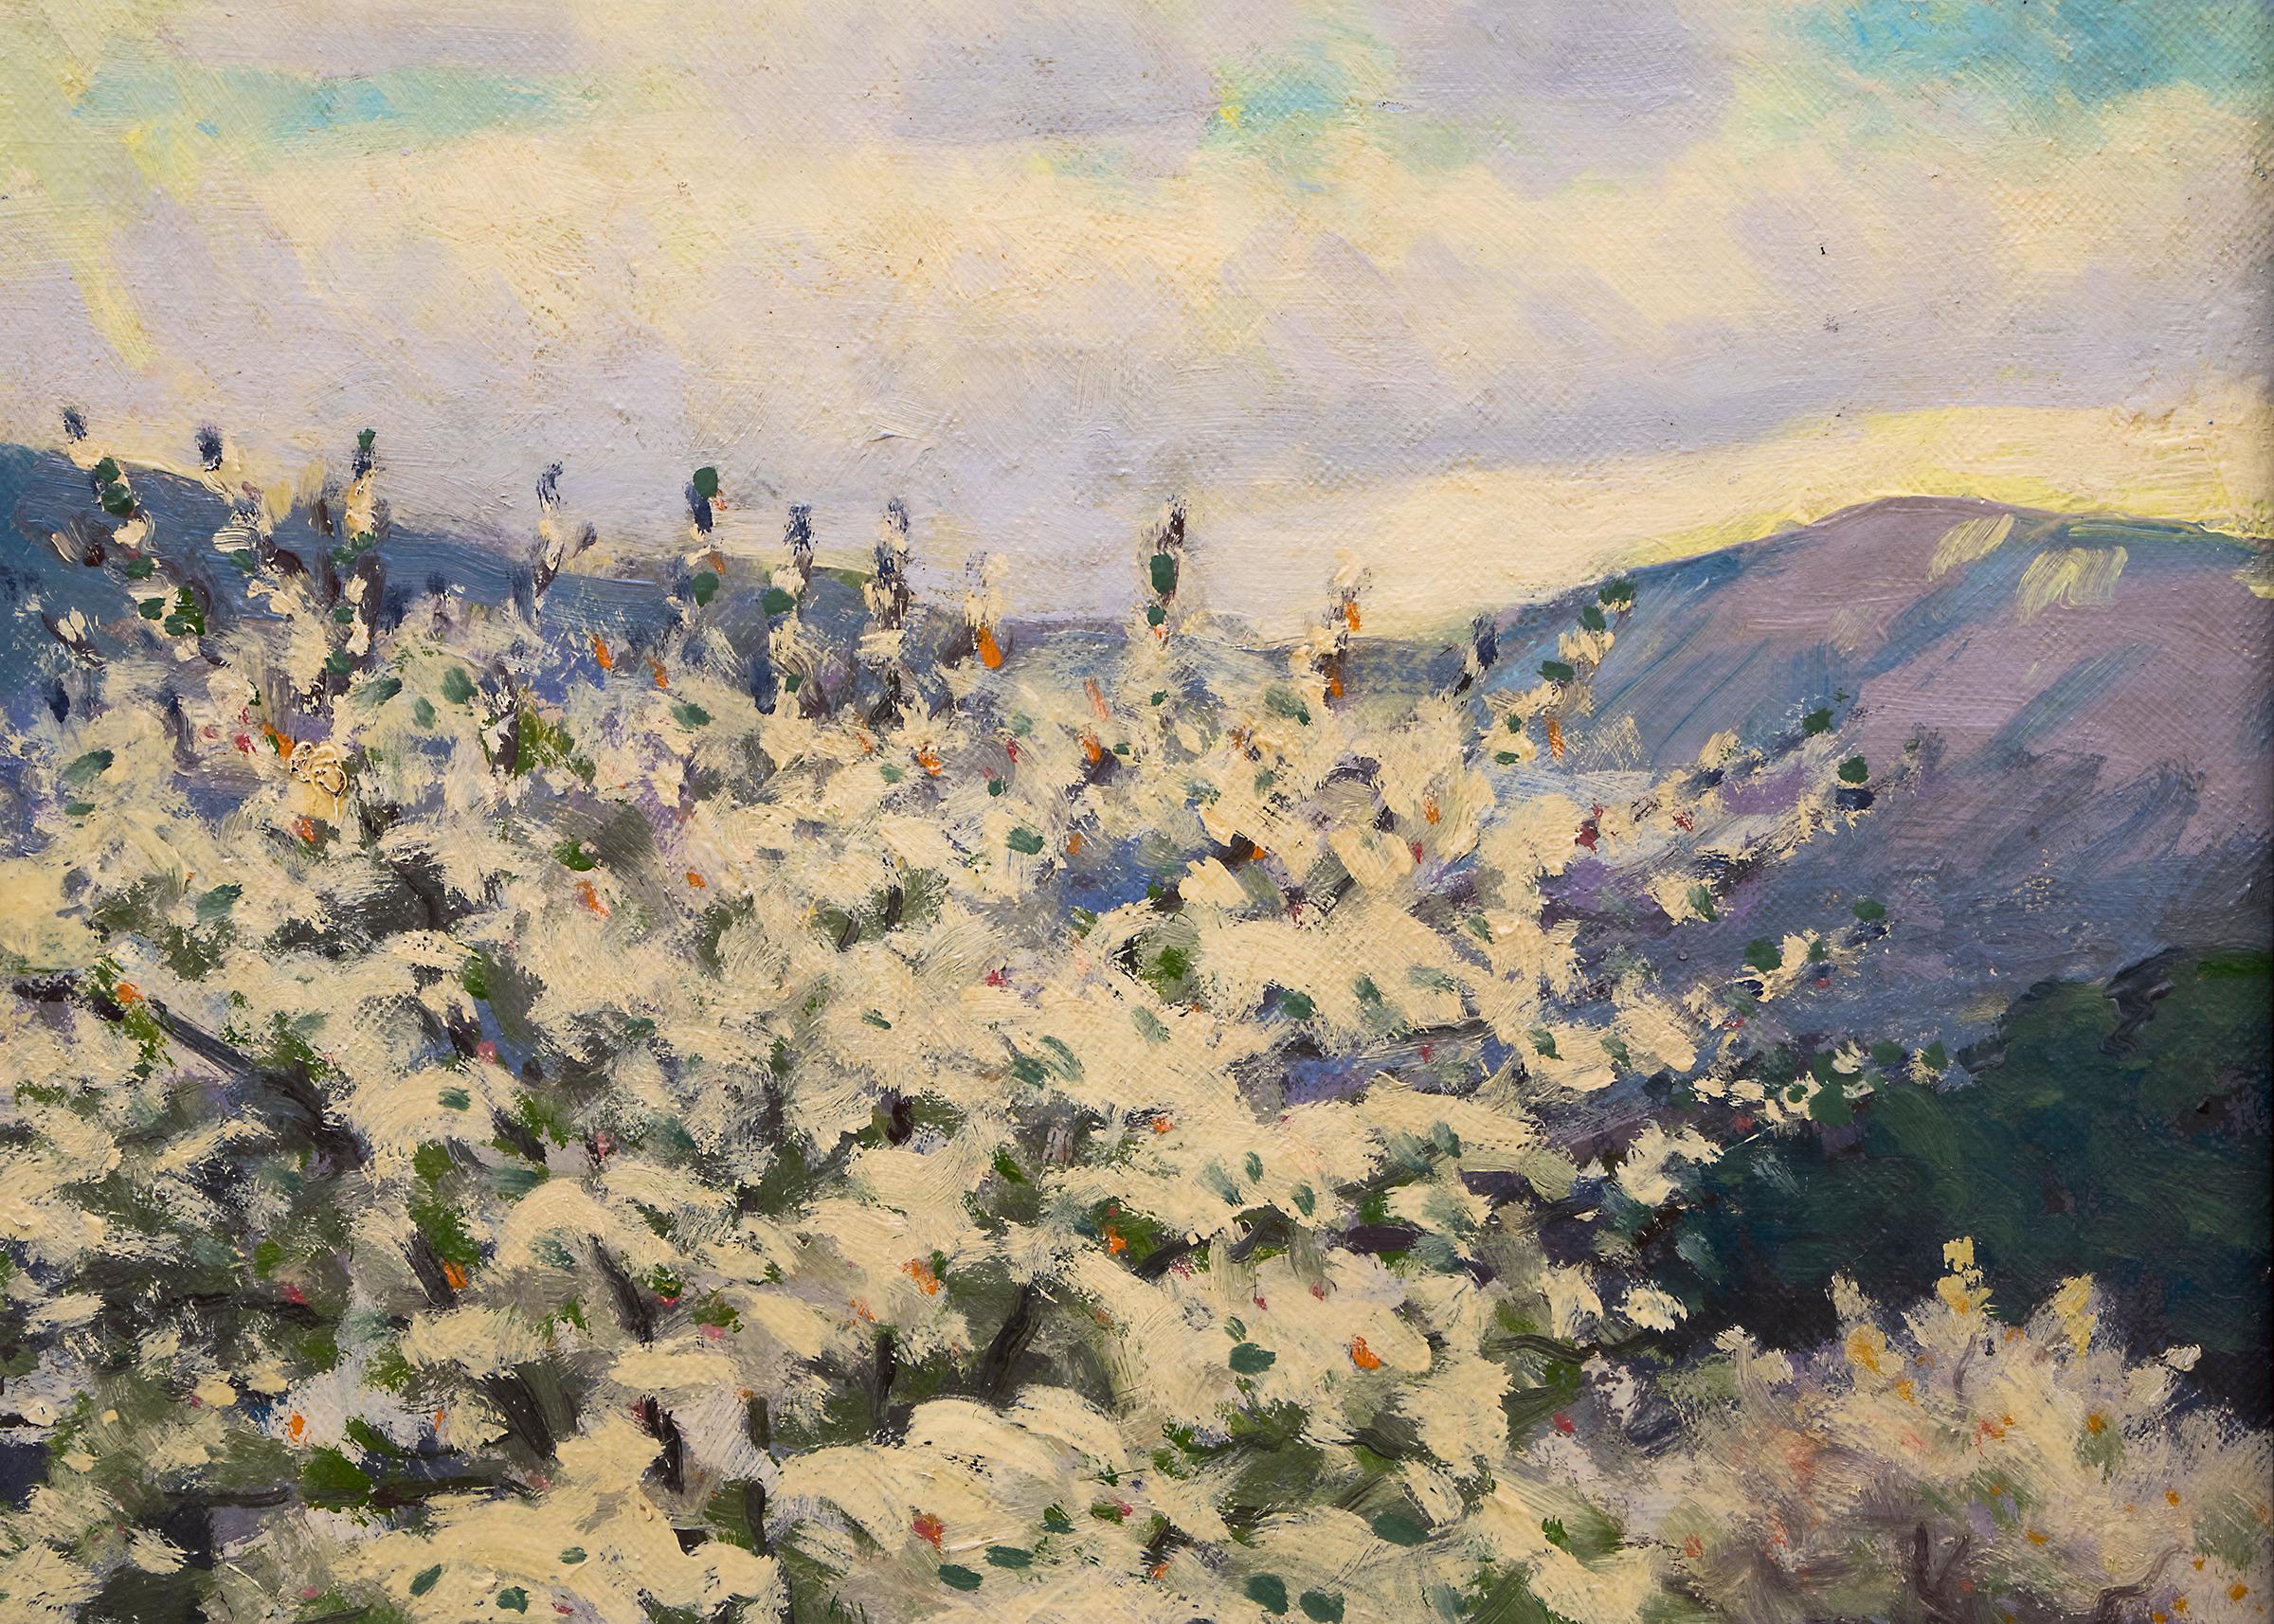 Apple Tree, vintage Signed oil painting of apple trees in blossom, springtime on the Western Slope, Colorado mountain landscape painting by Harold Skene (1883-1978). Dominant colors are green, blue and white with yellow and red/brown.  Custom frame